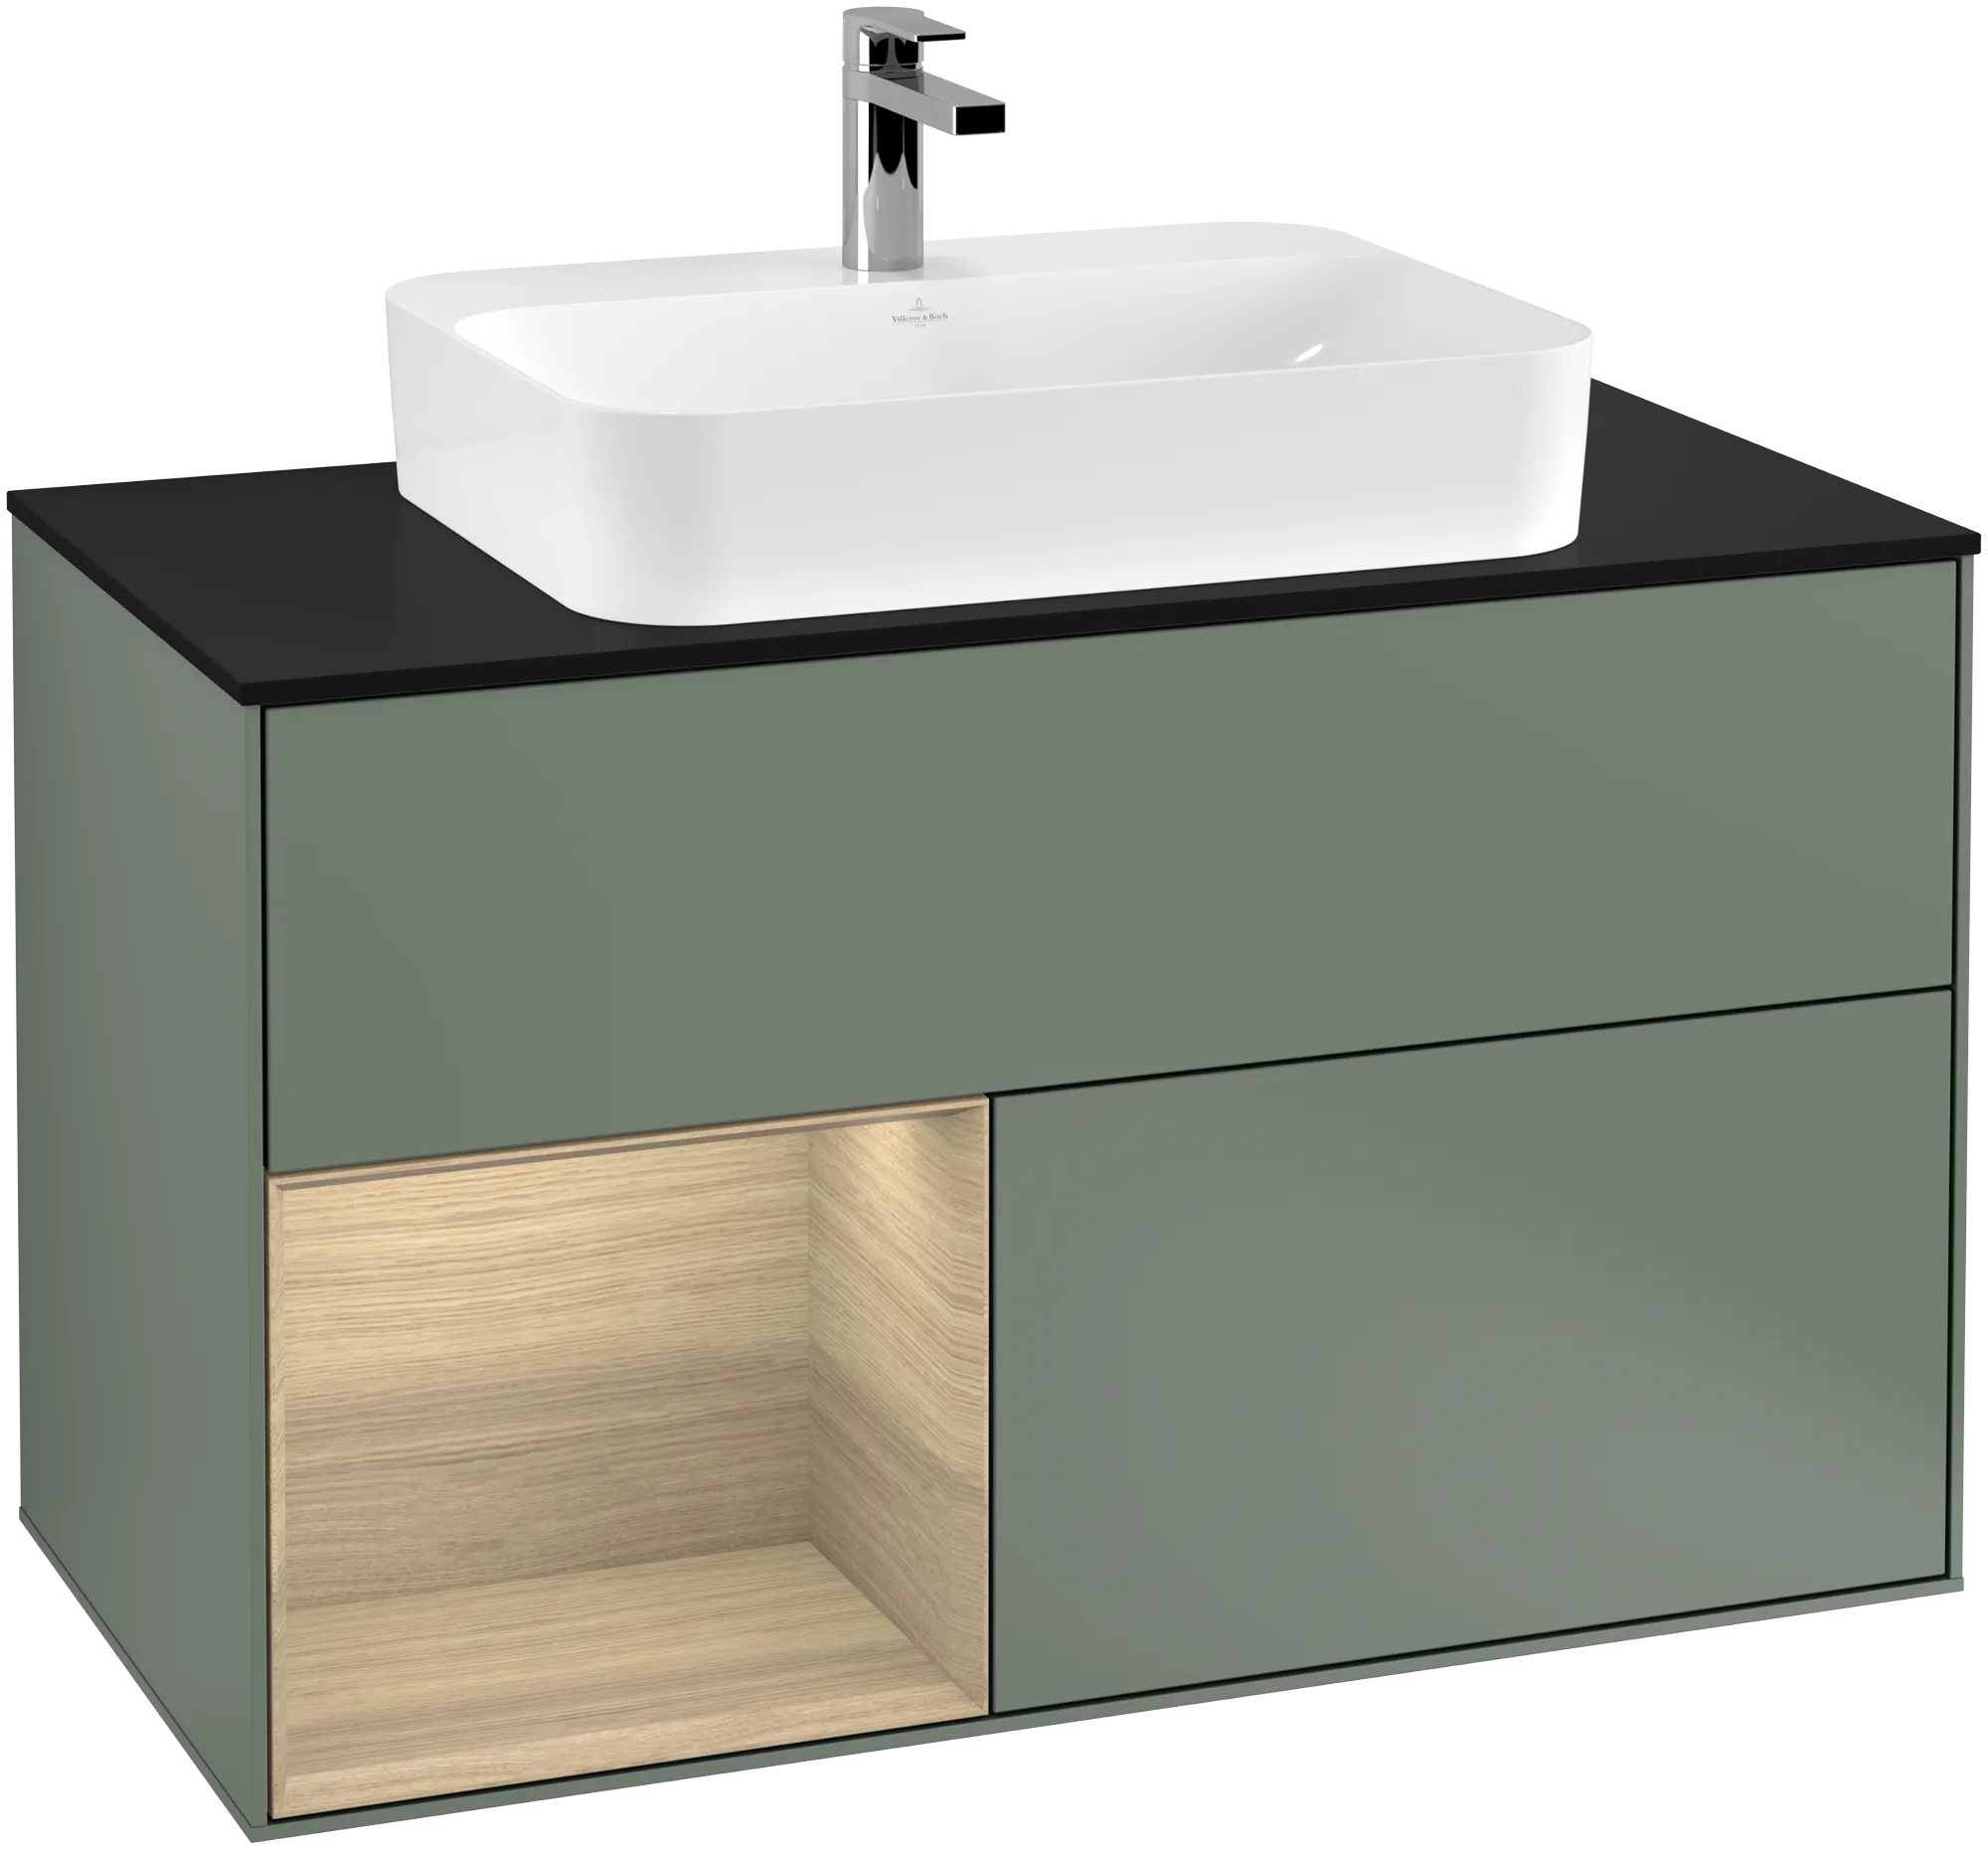 Picture of VILLEROY BOCH Finion Vanity unit, with lighting, 2 pull-out compartments, 1000 x 603 x 501 mm, Olive Matt Lacquer / Oak Veneer / Glass Black Matt #G362PCGM